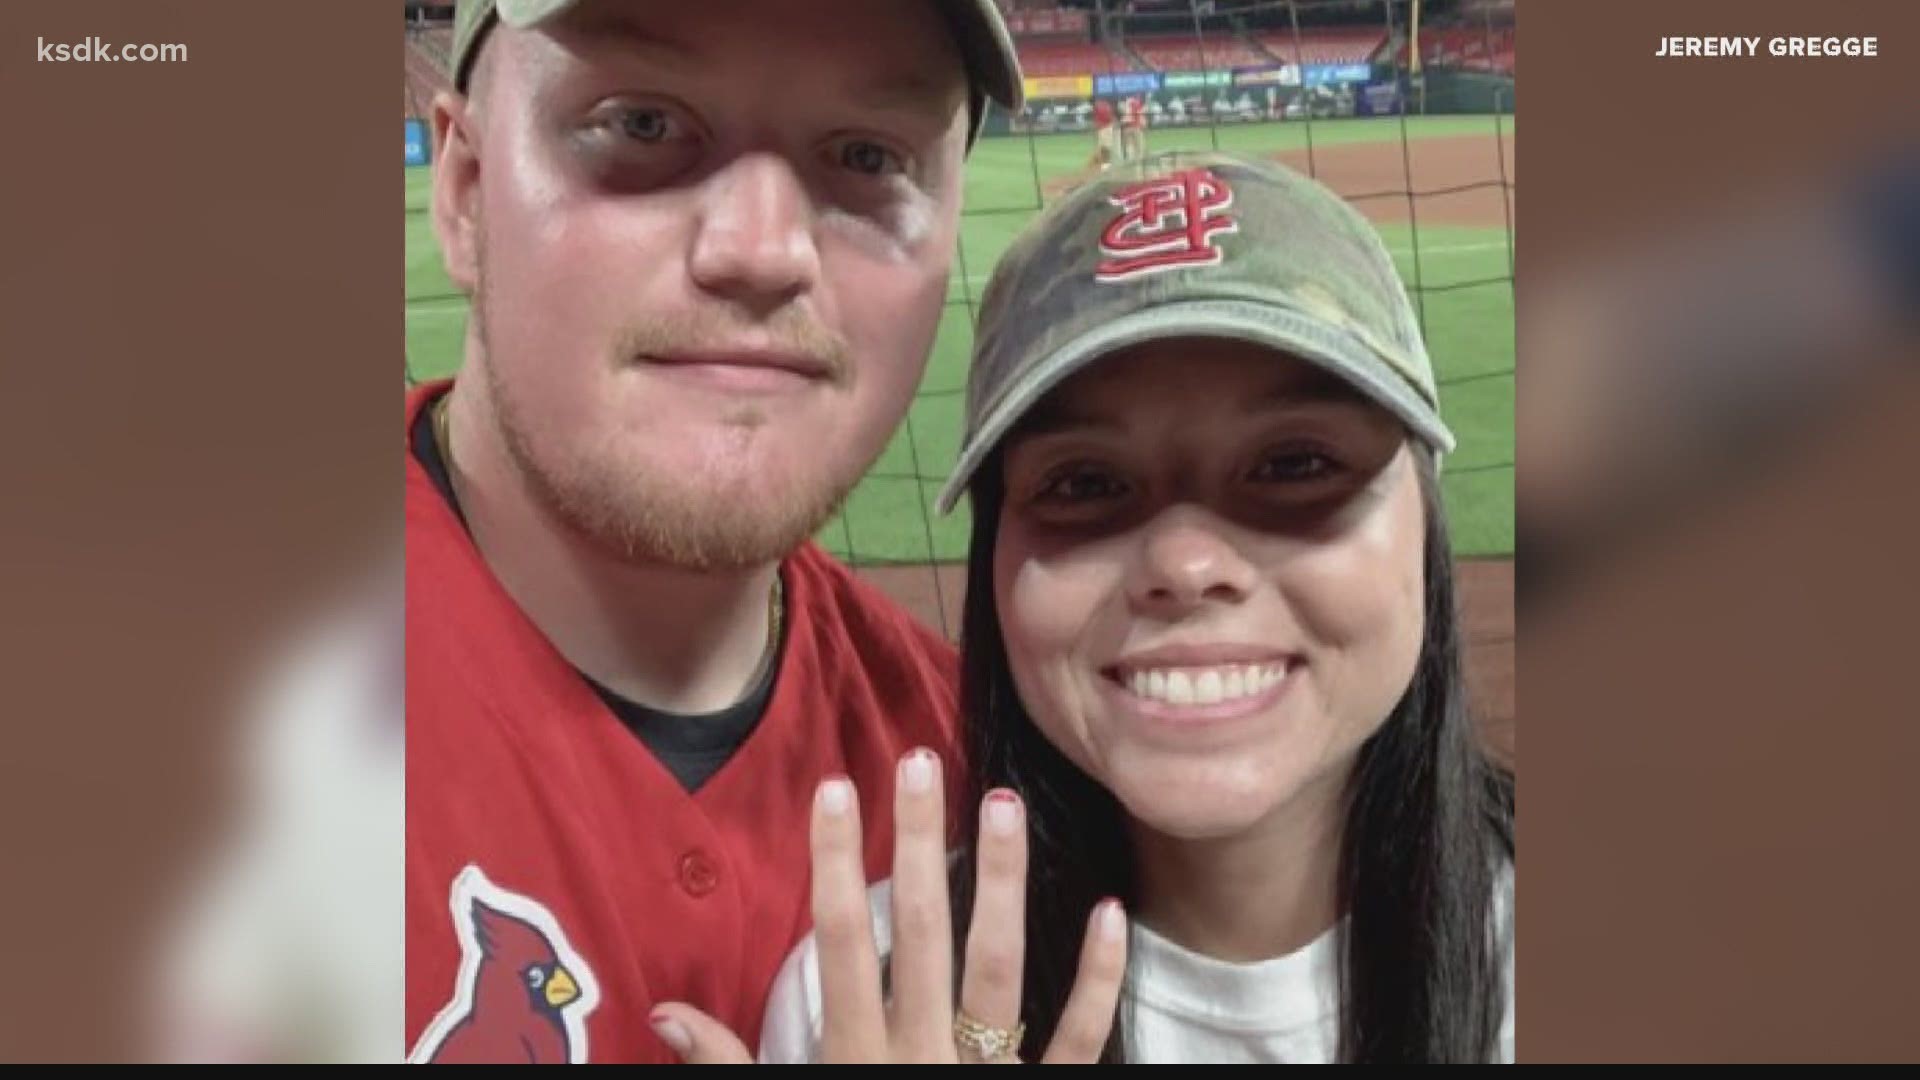 Yadier Molina hit a home run just moments after the proposal